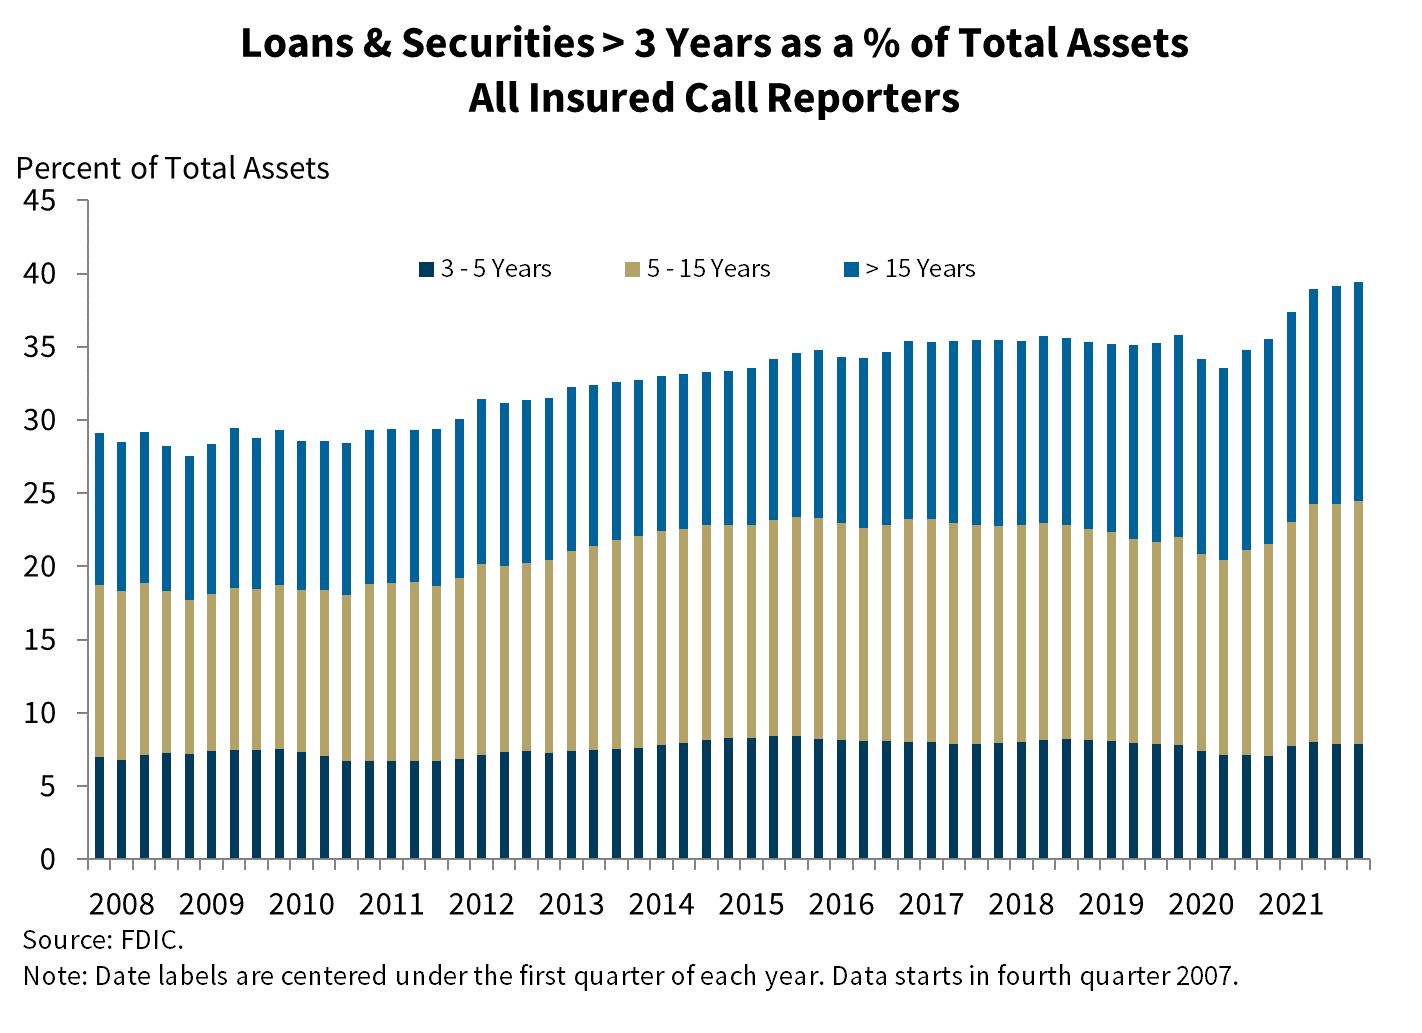 Chart 5: Loans and Securities > 3 years as a percent of Total Assets All Insured Call Reporters